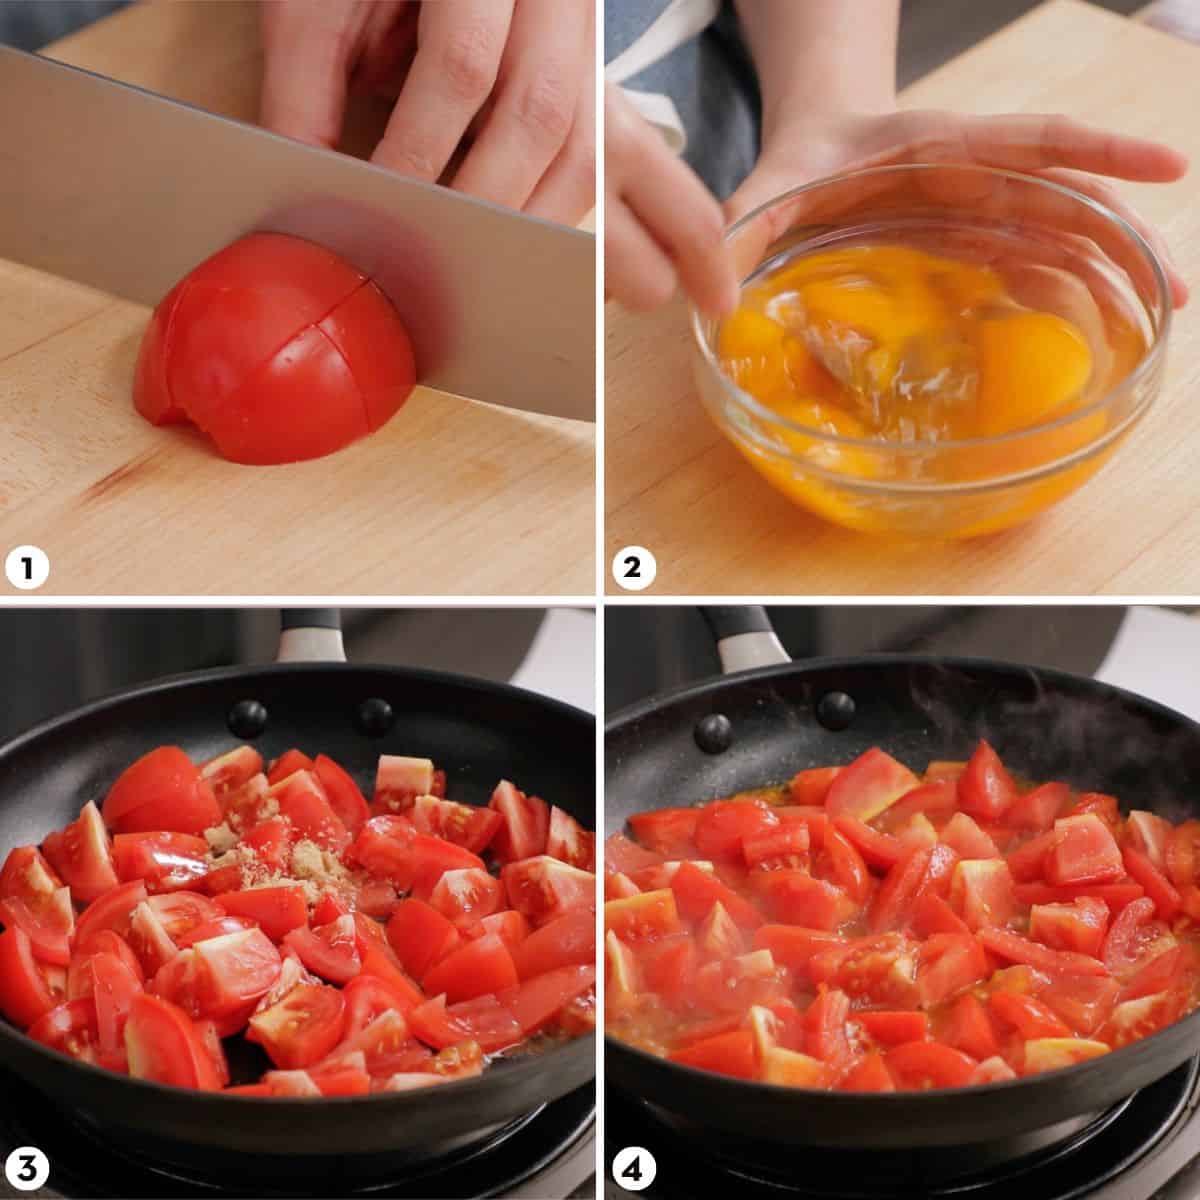 process shots for how to make tomato and egg stir fry, steps 1-4